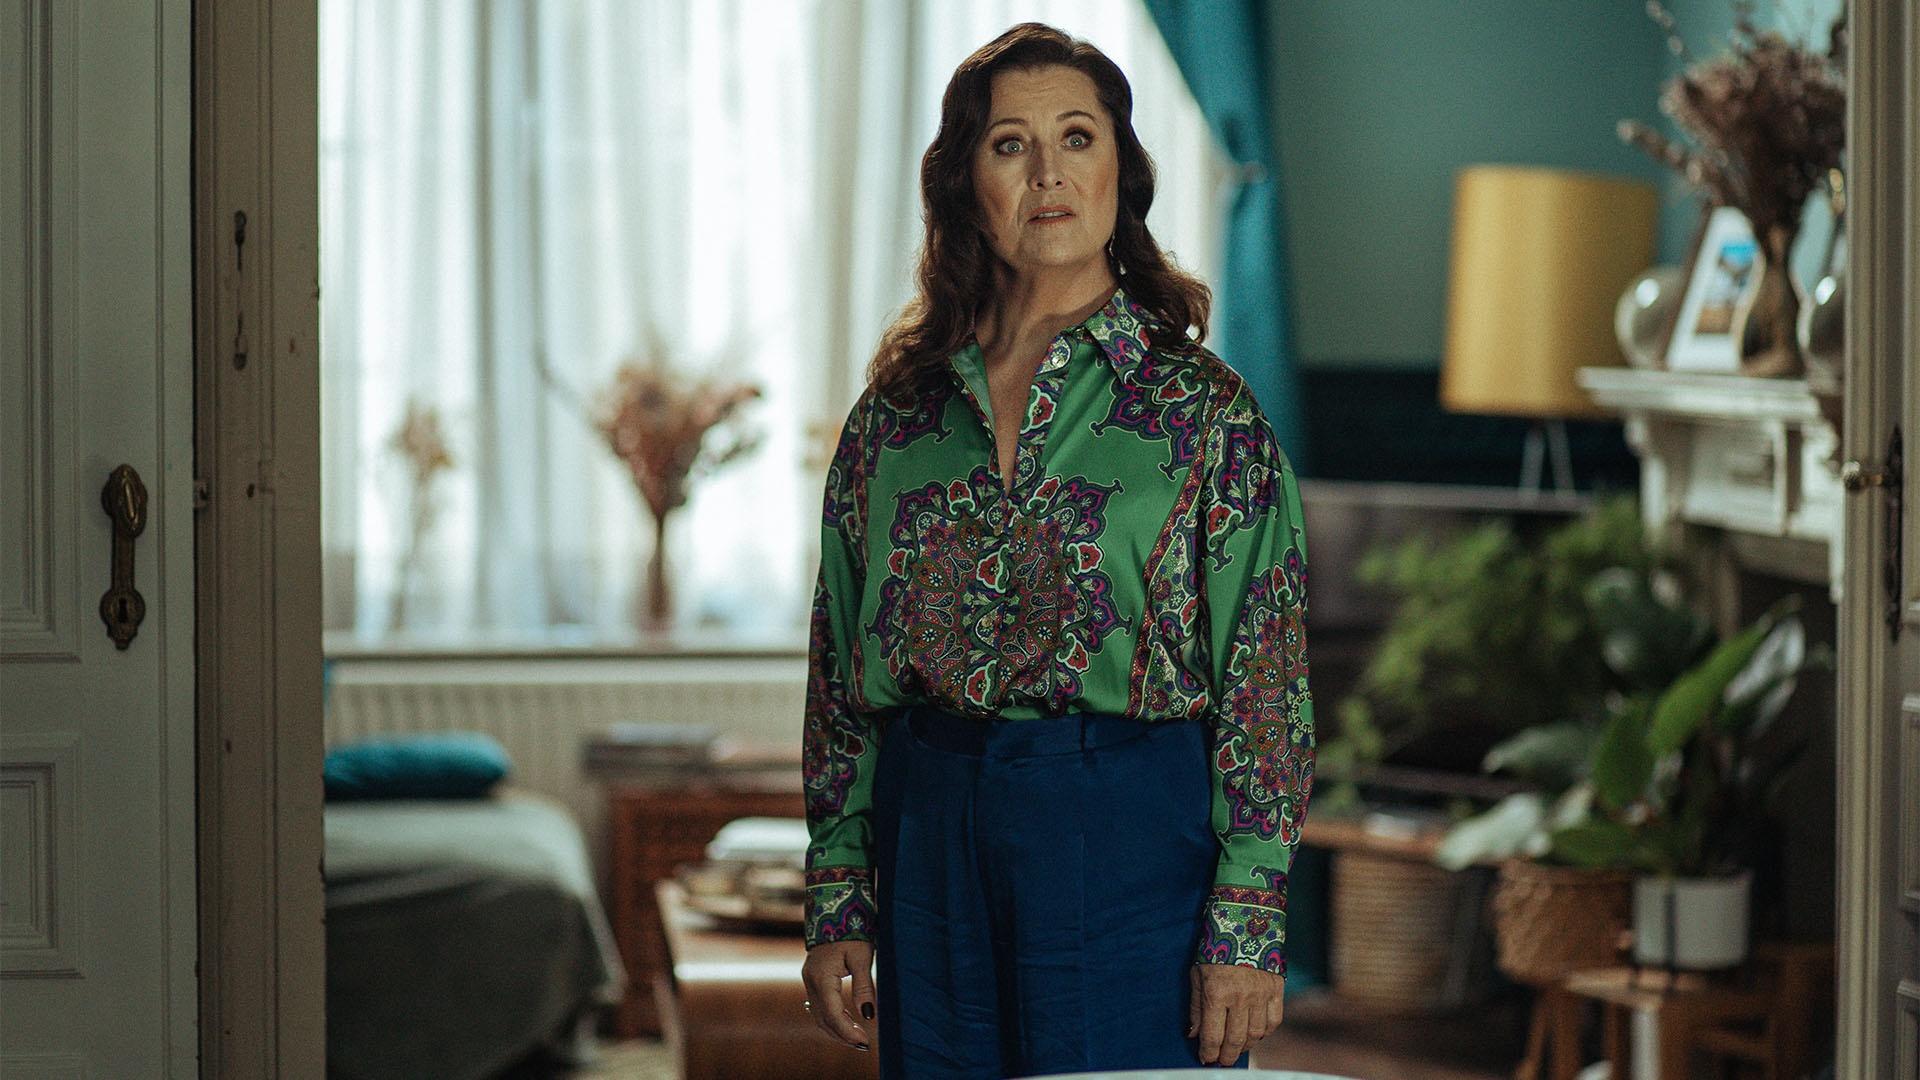 Dubravka Mimica standing in a scene from Before We Die.